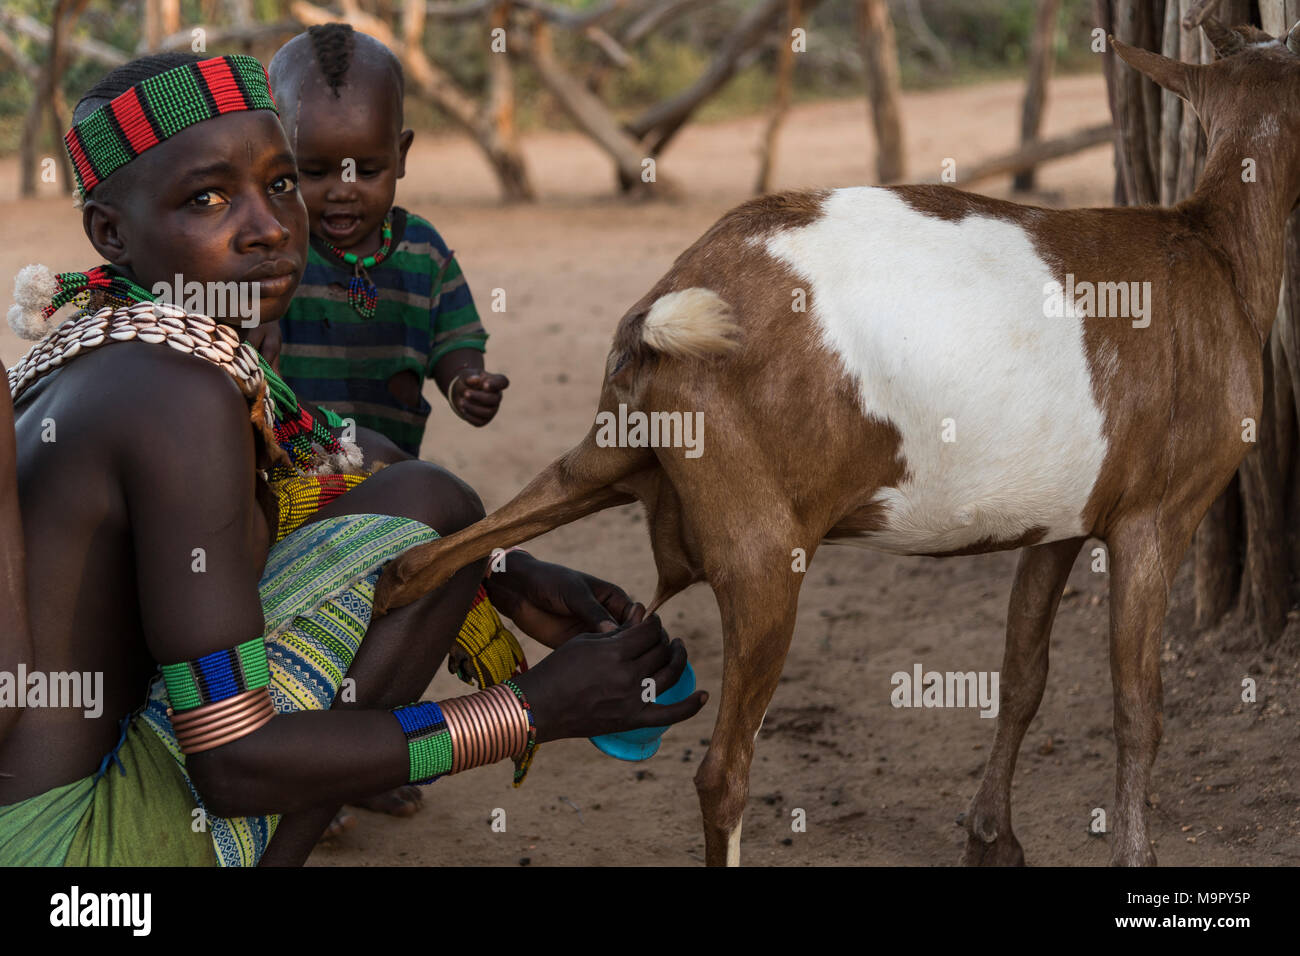 Young woman with toddler milking goats, Hamer tribe, Turmi, region of the southern nations, Ethiopia Stock Photo